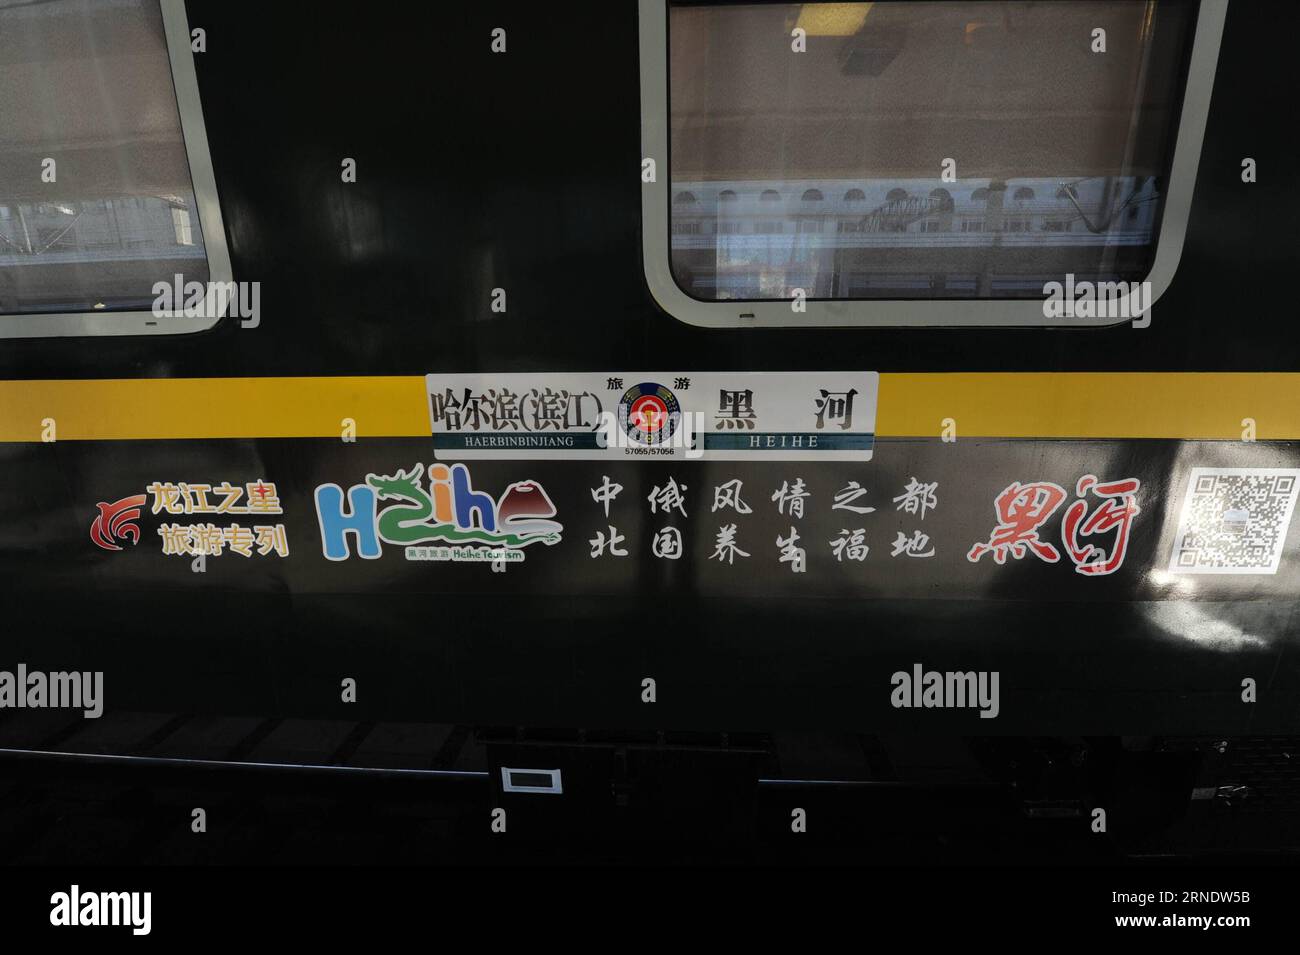 (160531) -- HARBIN, May 31, 2016 -- Photo taken on May 31, 2106 shows a plate of direction on a carriage of tourist train from Harbin to Heihe, northeast China s Helongjiang Province. To meet the needs of tourists, the railway administraion of Heilongjiang opened a new tourist line from Harbin to Heihe and invited some people to experience the line on Tuesday. ) (zkr) CHINA-HARBIN-TOURIST TRAIN(CN) WangxSong PUBLICATIONxNOTxINxCHN   160531 Harbin May 31 2016 Photo Taken ON May 31 2106 Shows a Plate of Direction ON a carriage of Tourist Train from Harbin to Heihe Northeast China S Helongjiang P Stock Photo